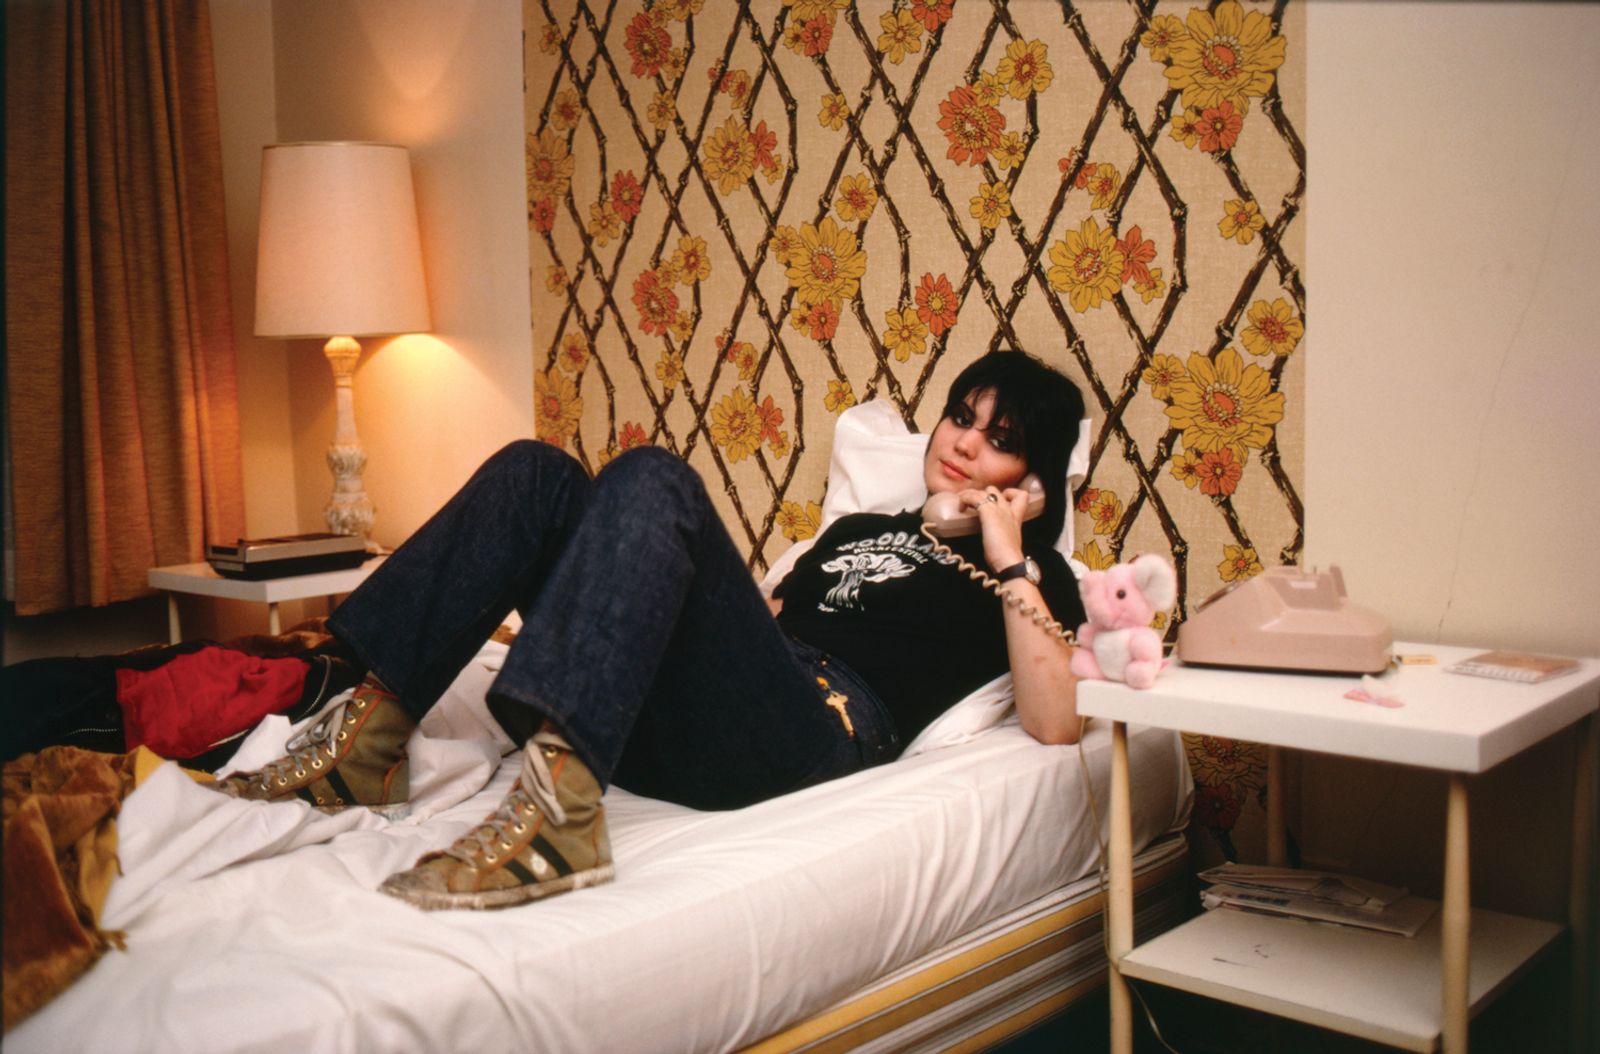 Joan Jett On The Phone With Lisa, 1978